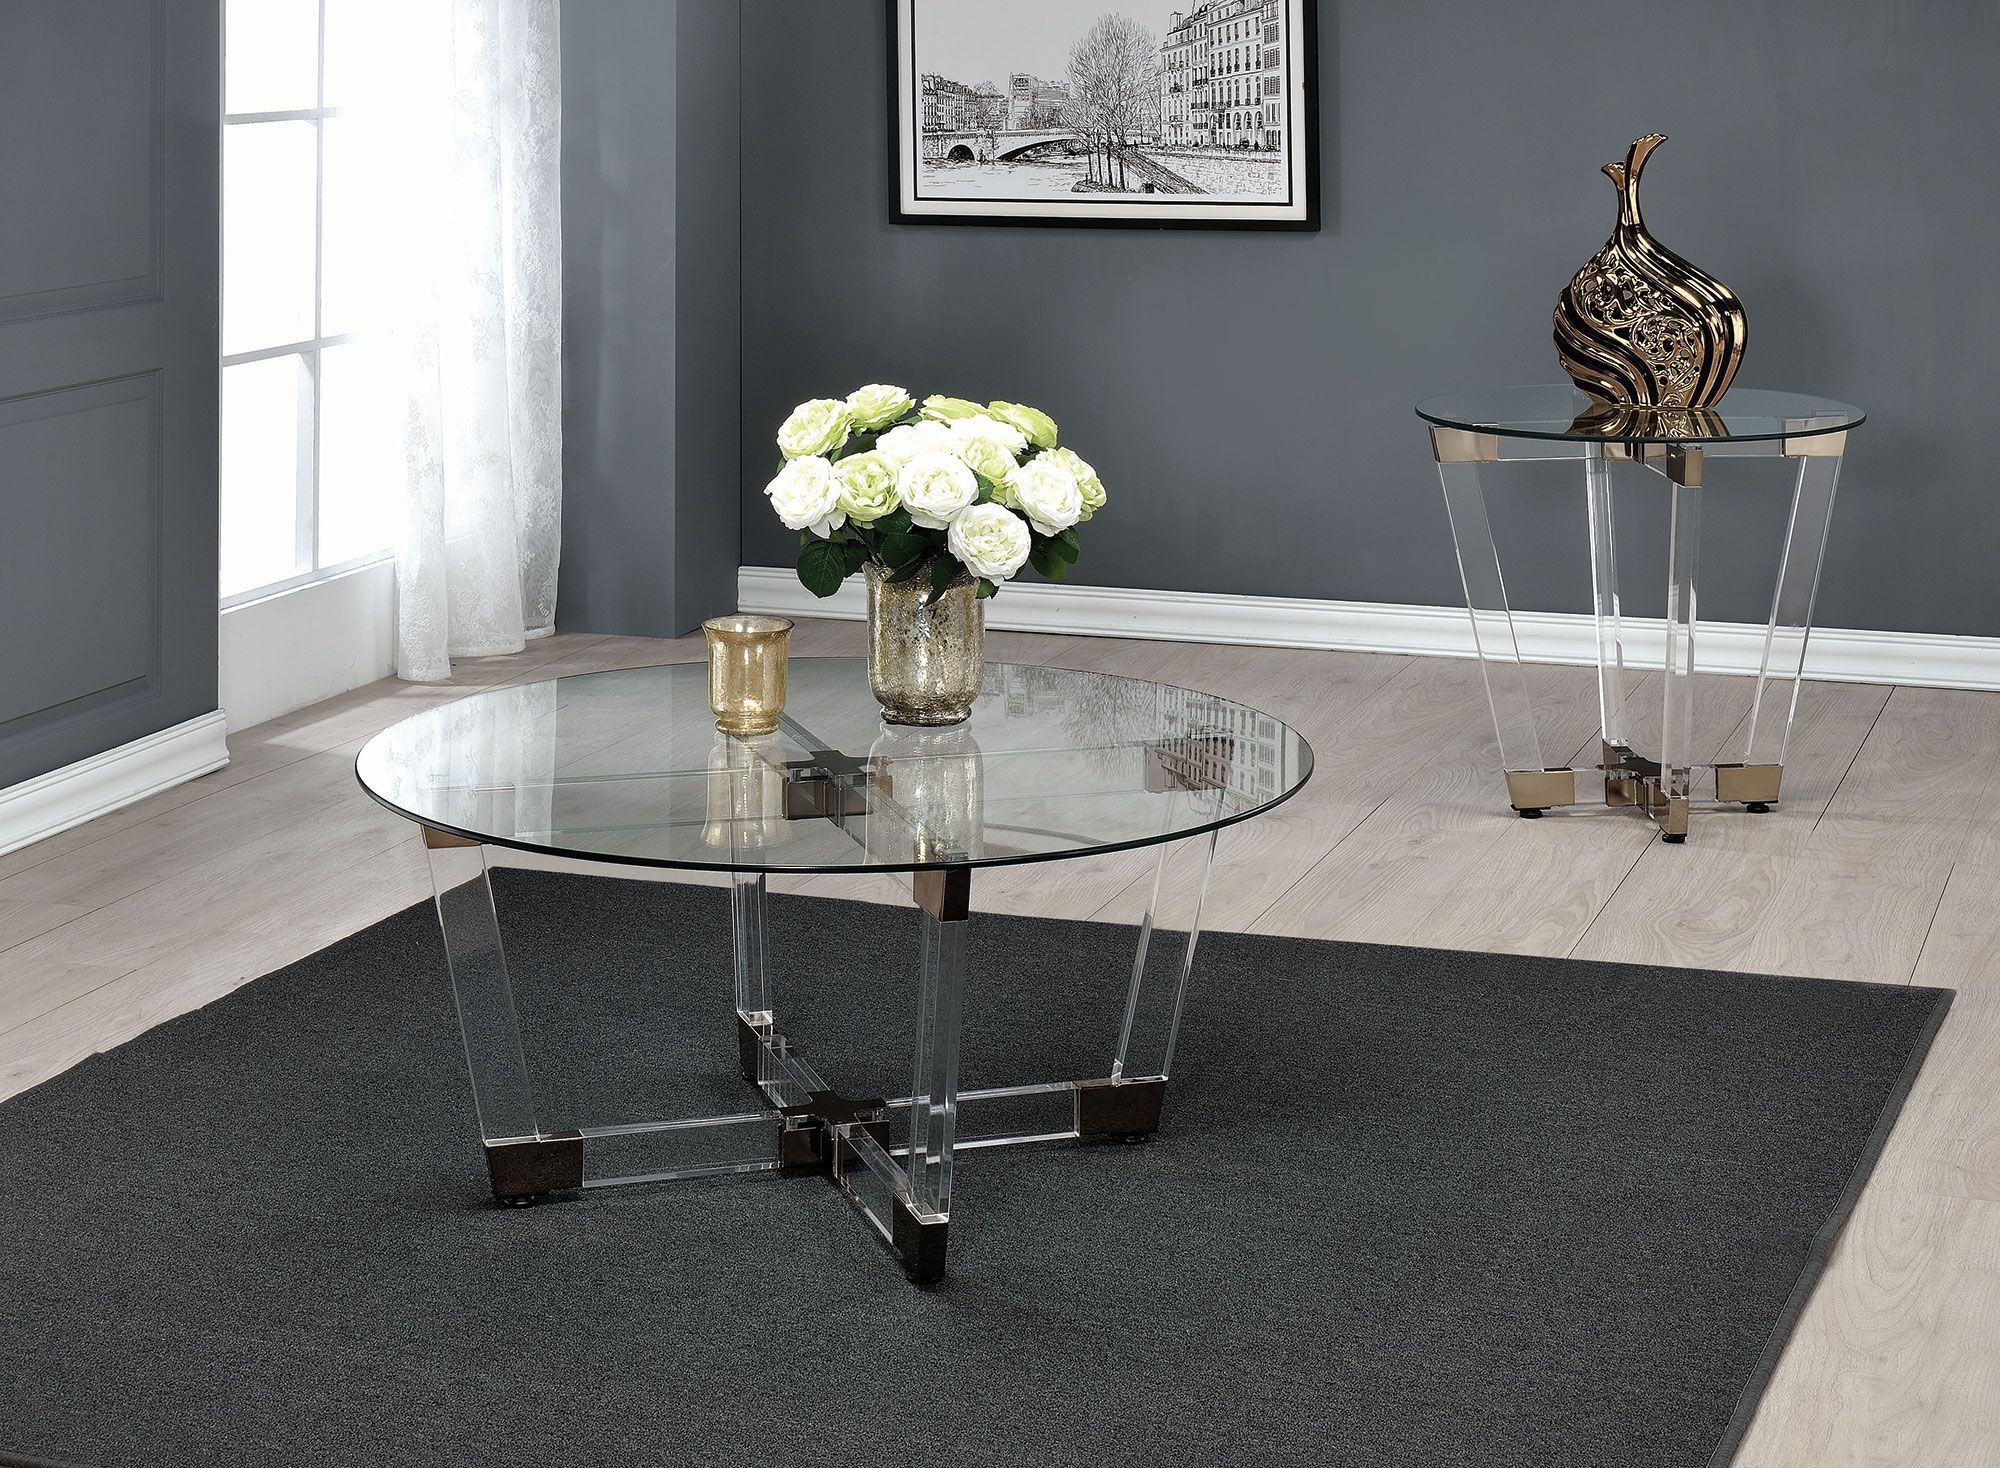 Coleman Pertaining To Best And Newest Silver And Acrylic Coffee Tables (View 9 of 10)